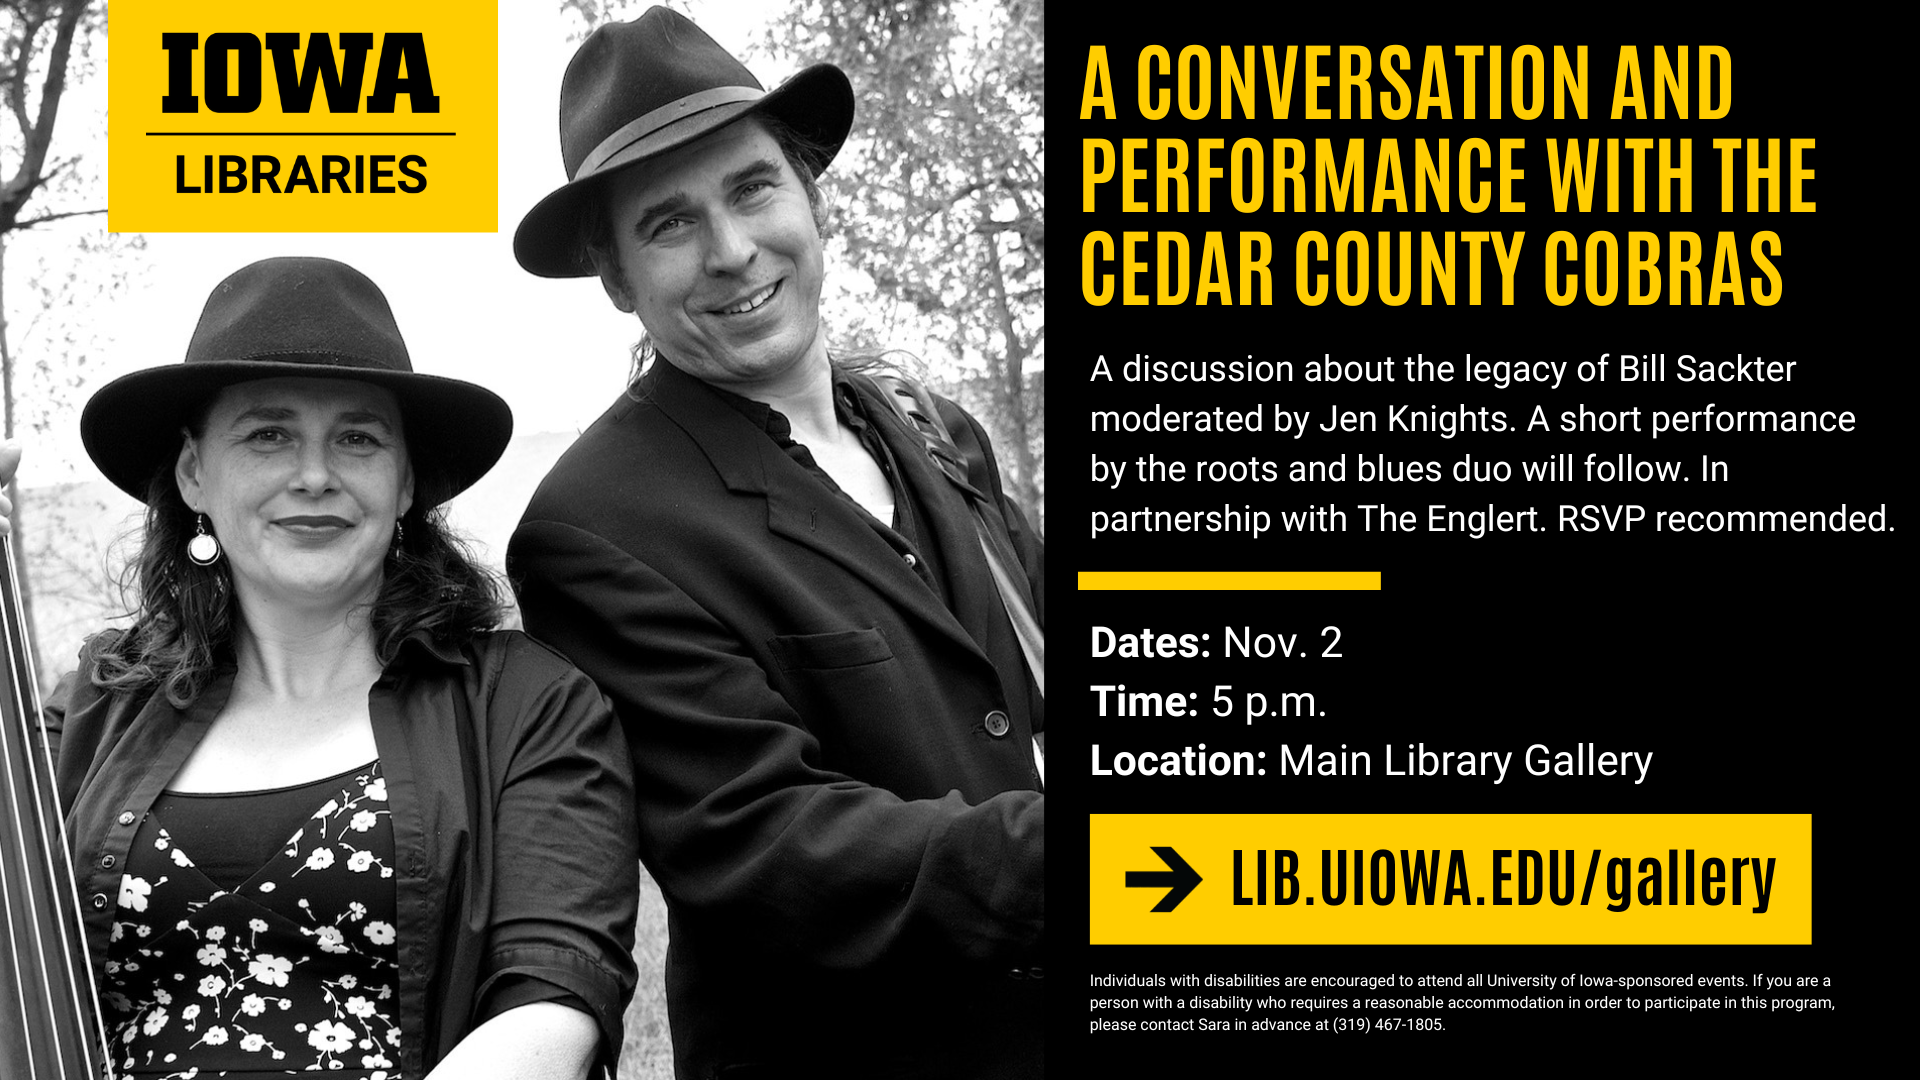 Conversation and performance with the Cedar County Cobras. Short discussion about Bill Sackter's legacy and short performance to follow. Free to attend. Main Library Gallery at 5:00 p.m. on November 2.